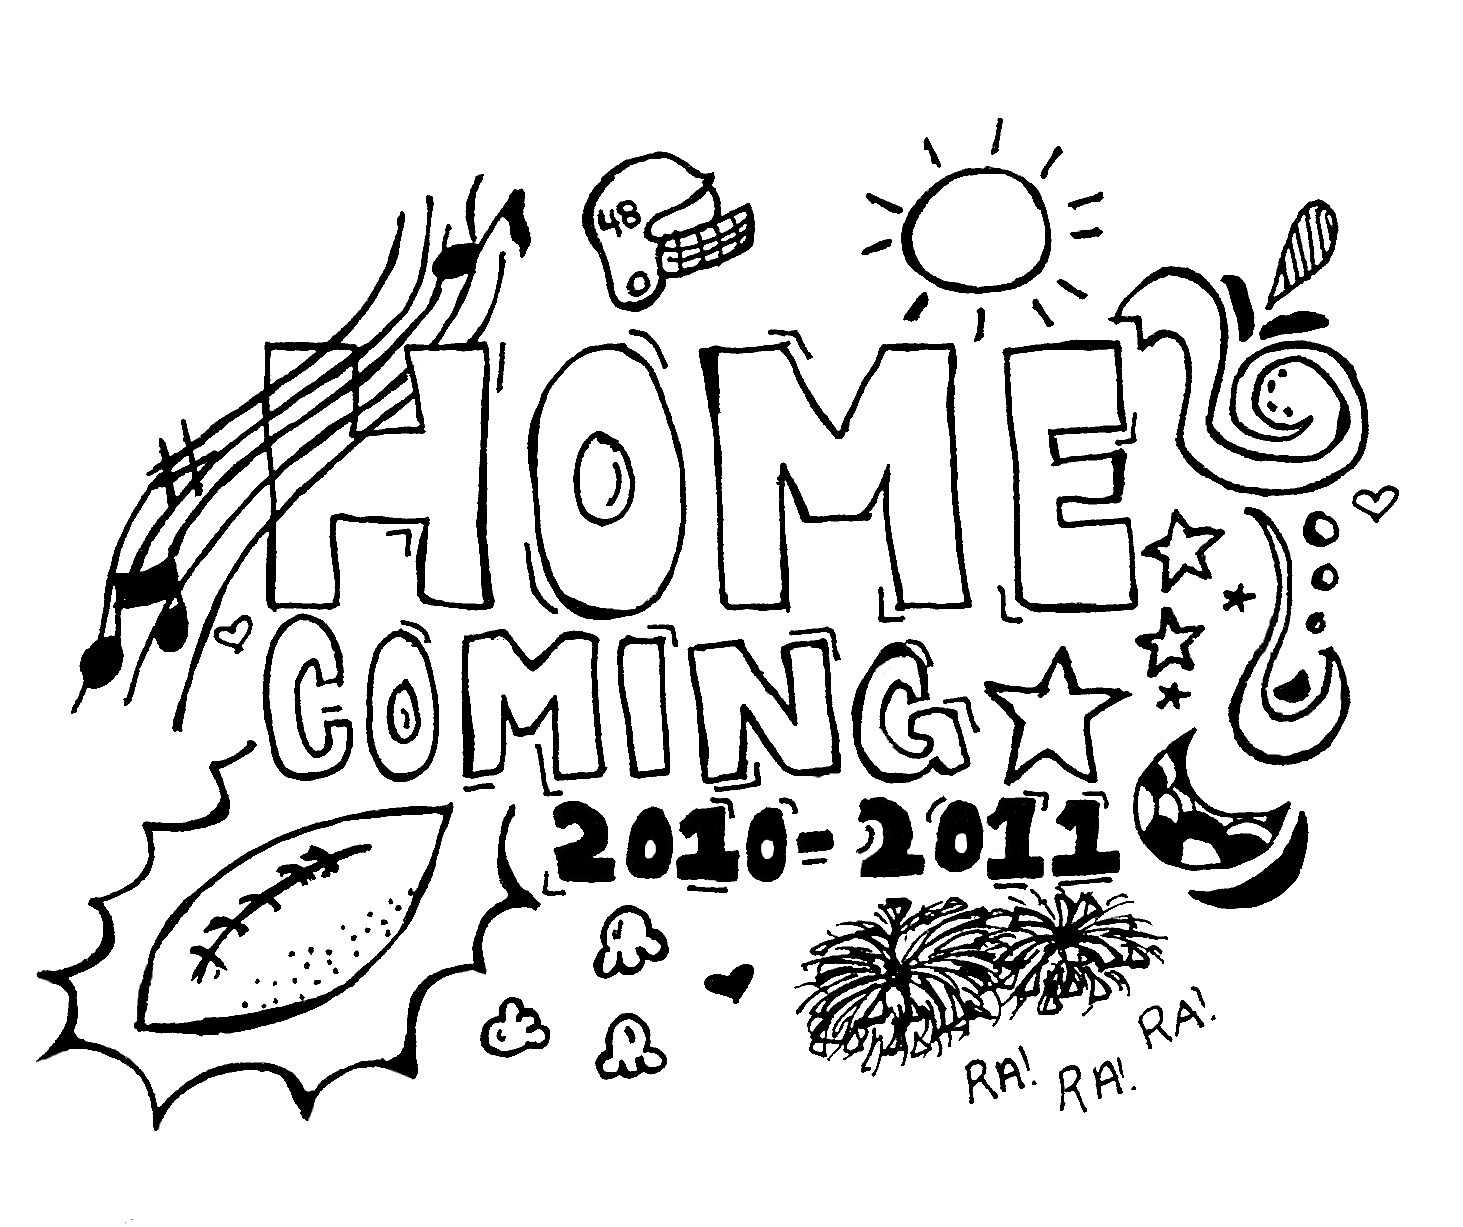 Galleries Related: Will You Go To Homecoming With Me , Homecoming Week Graphics , Homecoming 2013 Graphics , The Word Homecoming , Homecoming Dance Clip Art ...